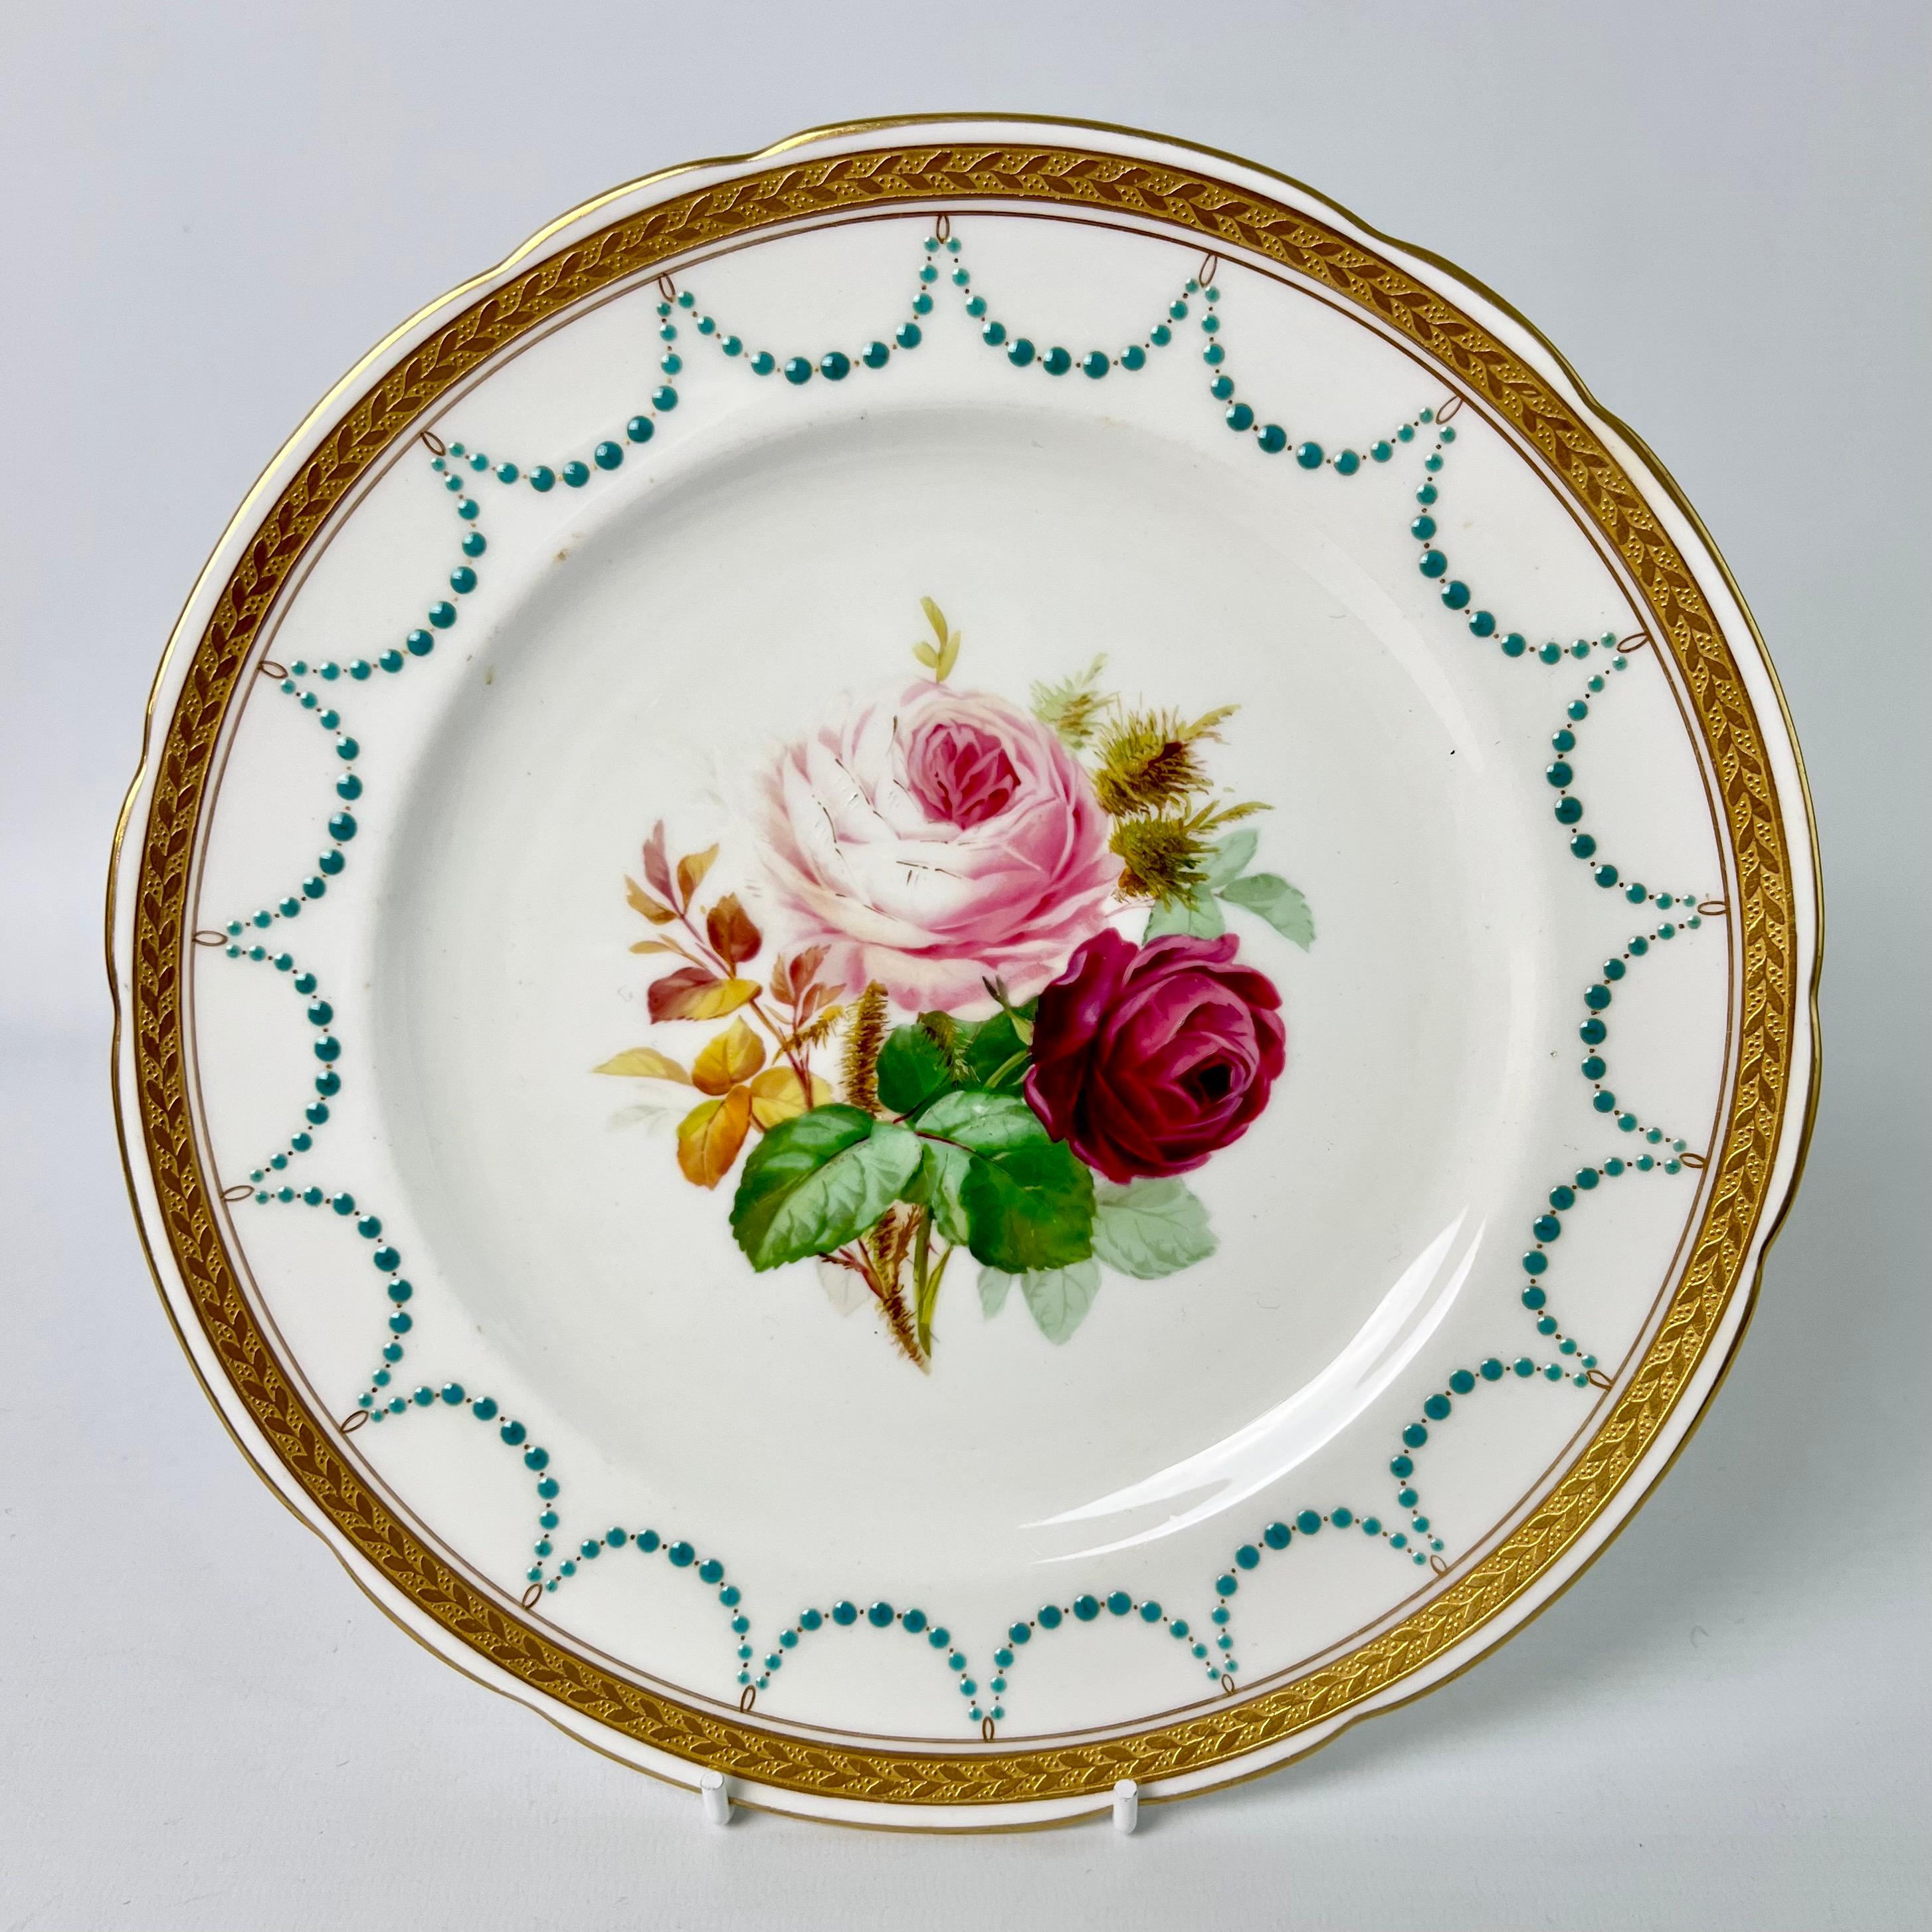 Late 19th Century Minton Porcelain Dessert Service, Turquoise and Gilt, Flowers and Fruits, 1870